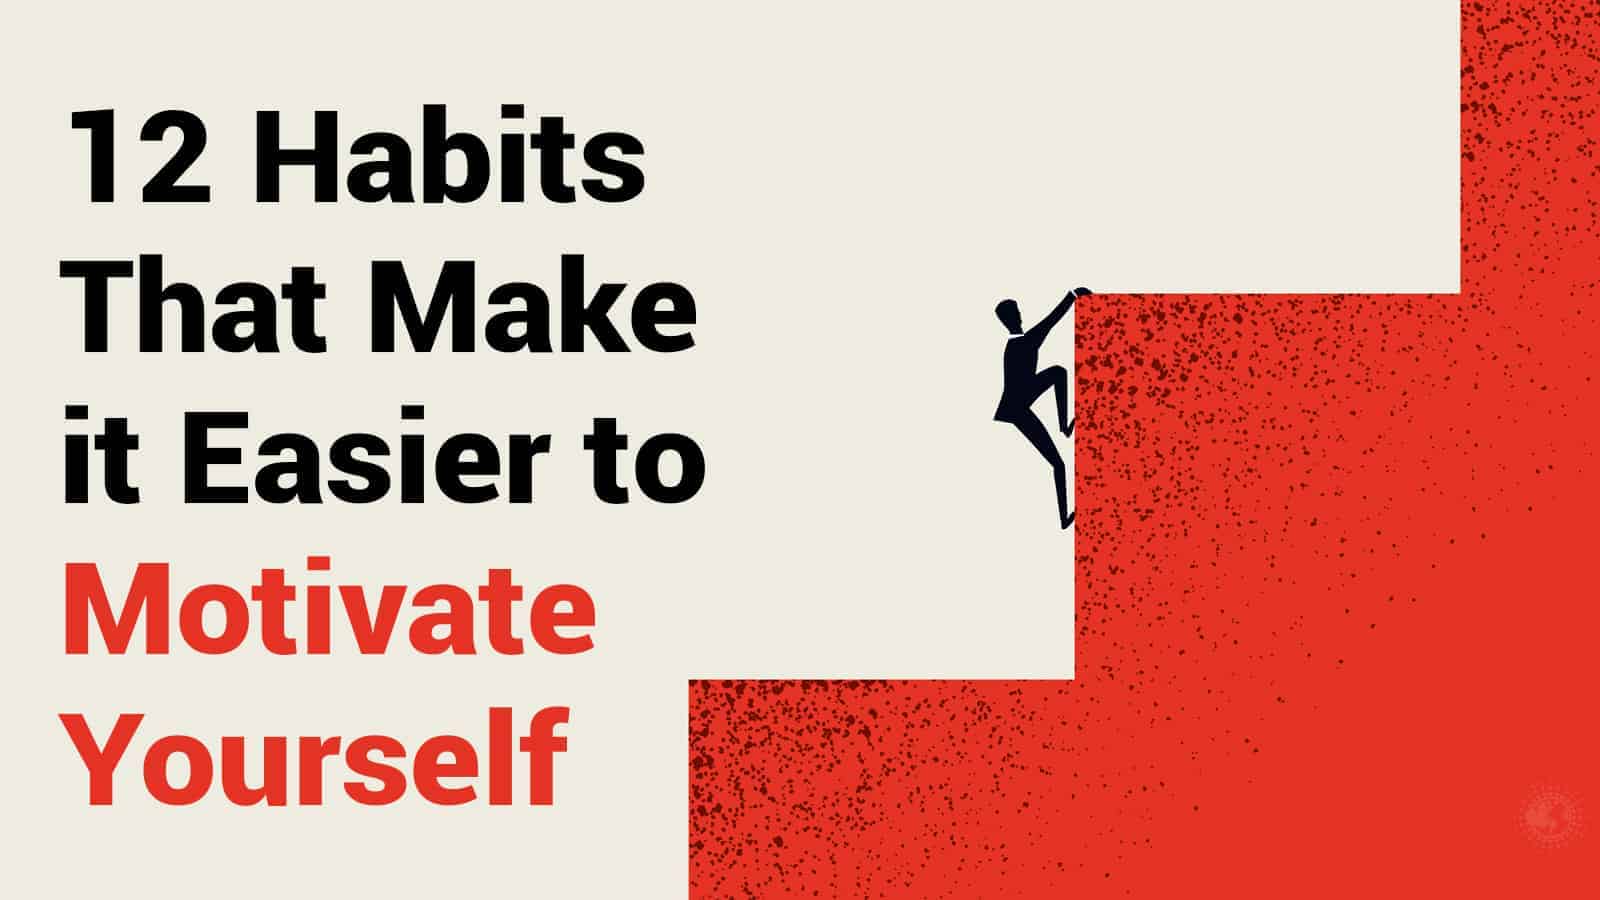 12 Habits That Make it Easier to Motivate Yourself